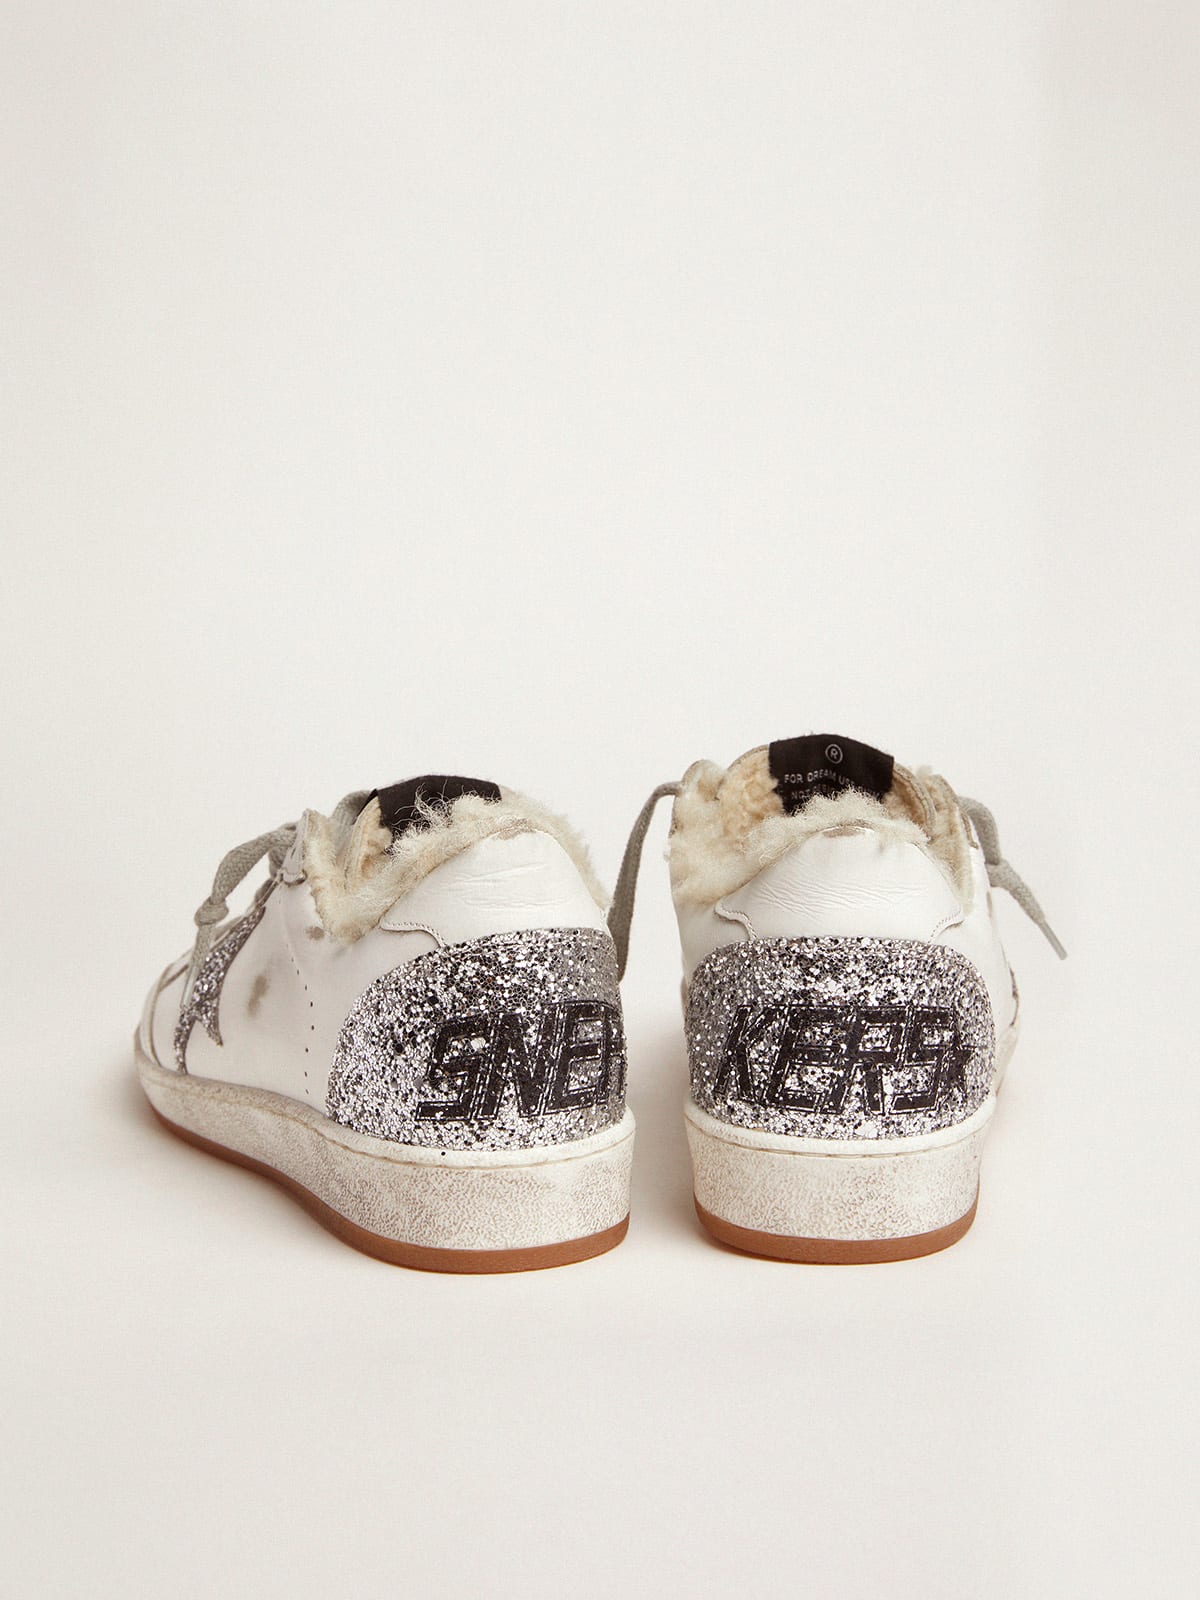 Ball Star sneakers in leather with glitter details and shearling lining |  Golden Goose